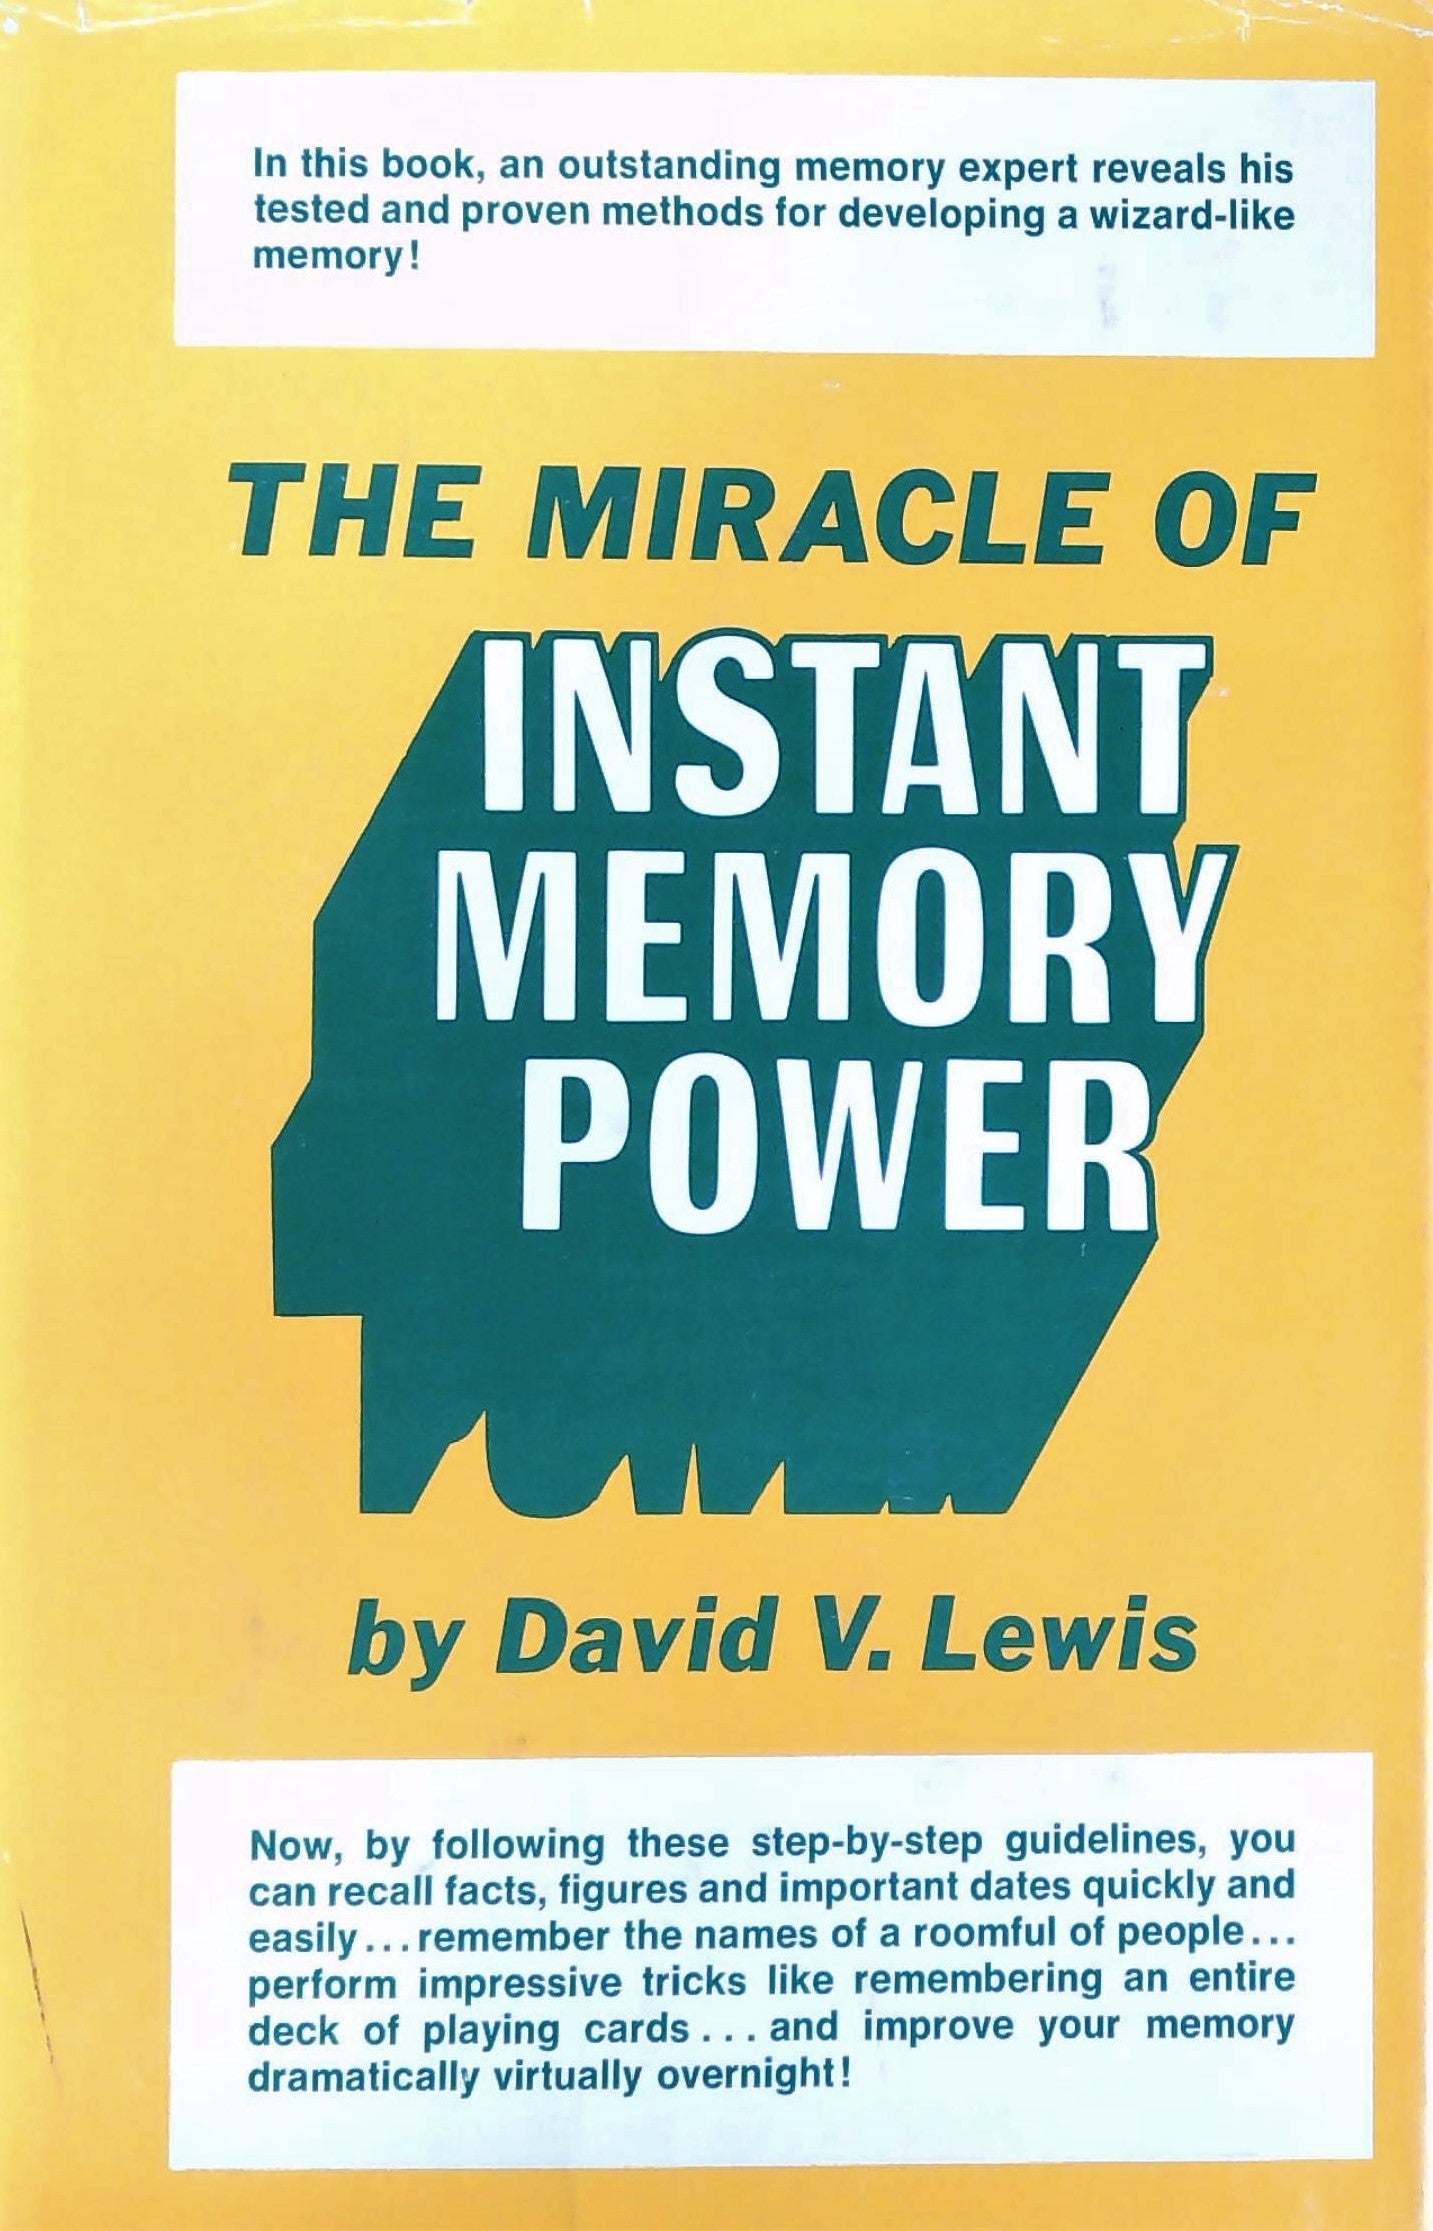 Livre ISBN 0135852730 The Miracle of Instant Memory Power (David V. Lewis)